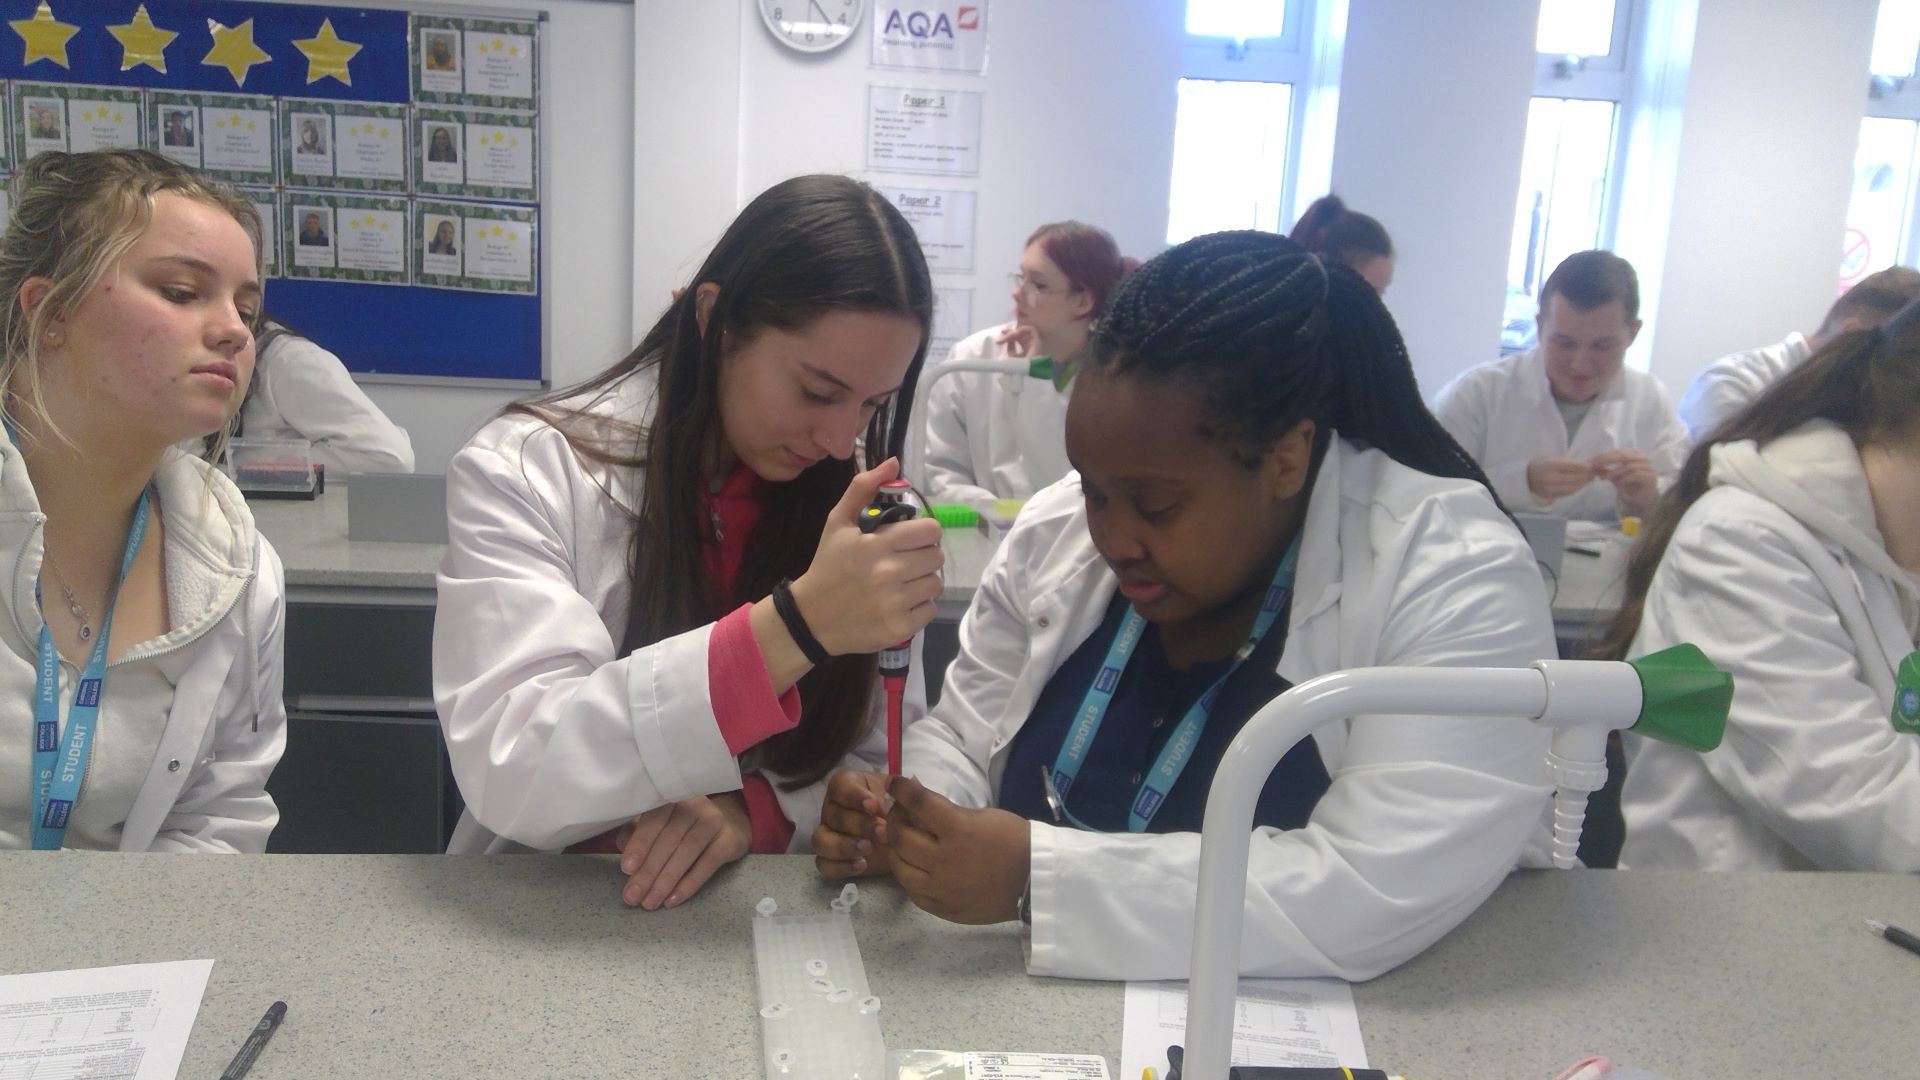 Students doing an experiment in a genetics lab.